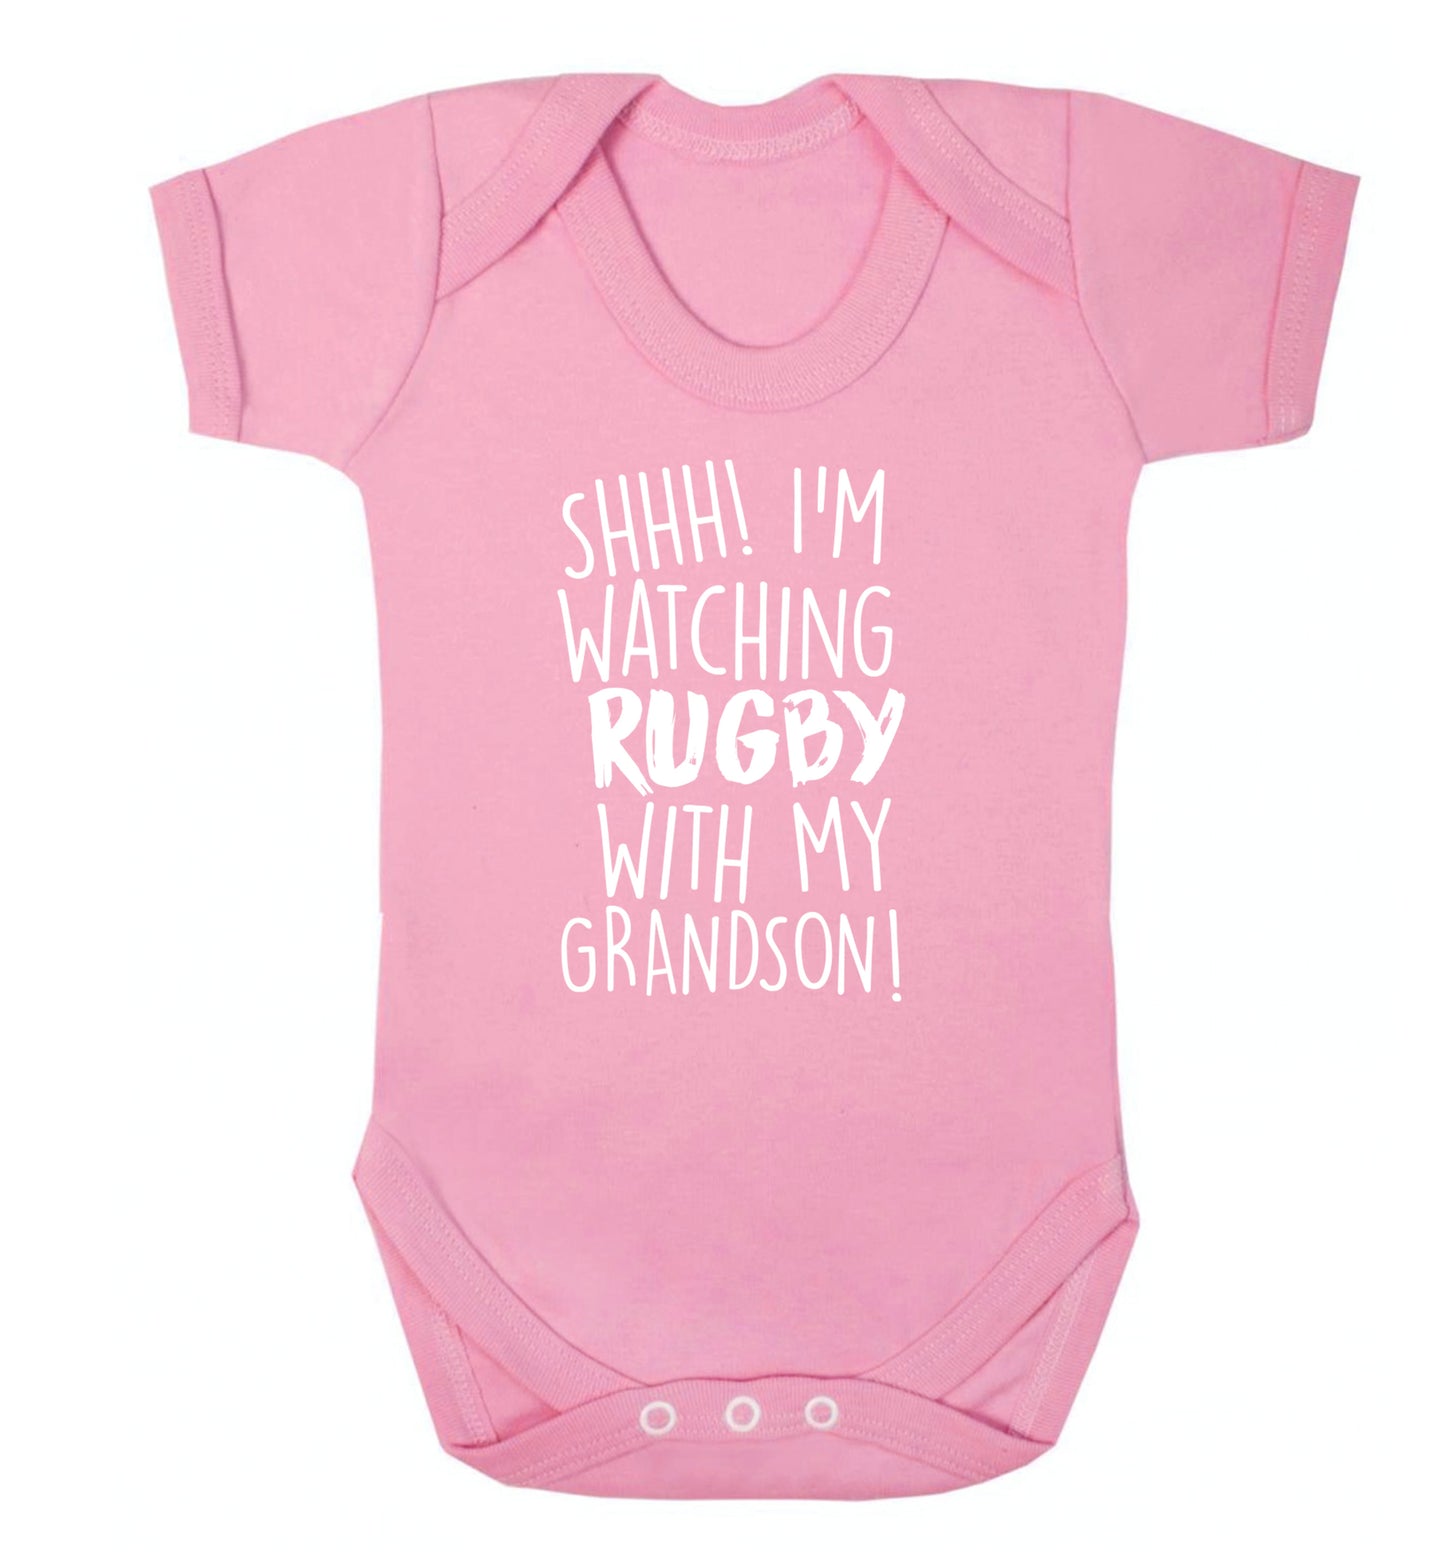 Shh I'm watching rugby with my grandson Baby Vest pale pink 18-24 months